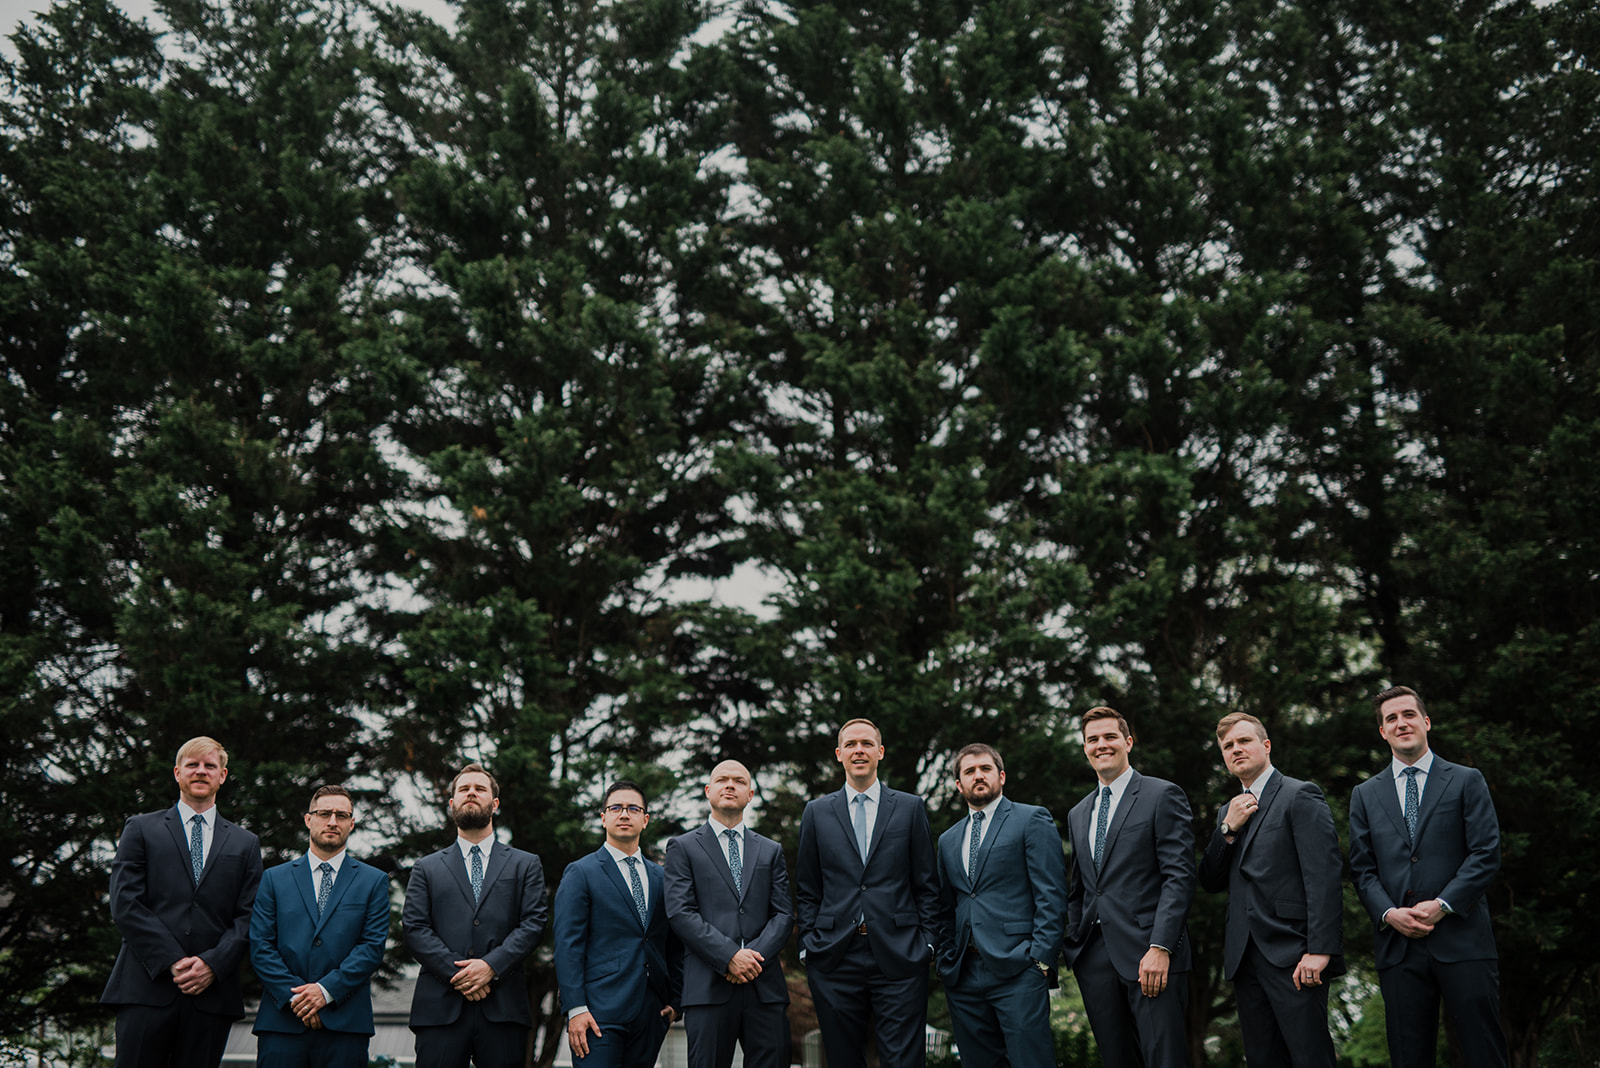 The groomsmen gather together before an outdoor wedding ceremony at Blue Hill Farm in Waterford, VA.